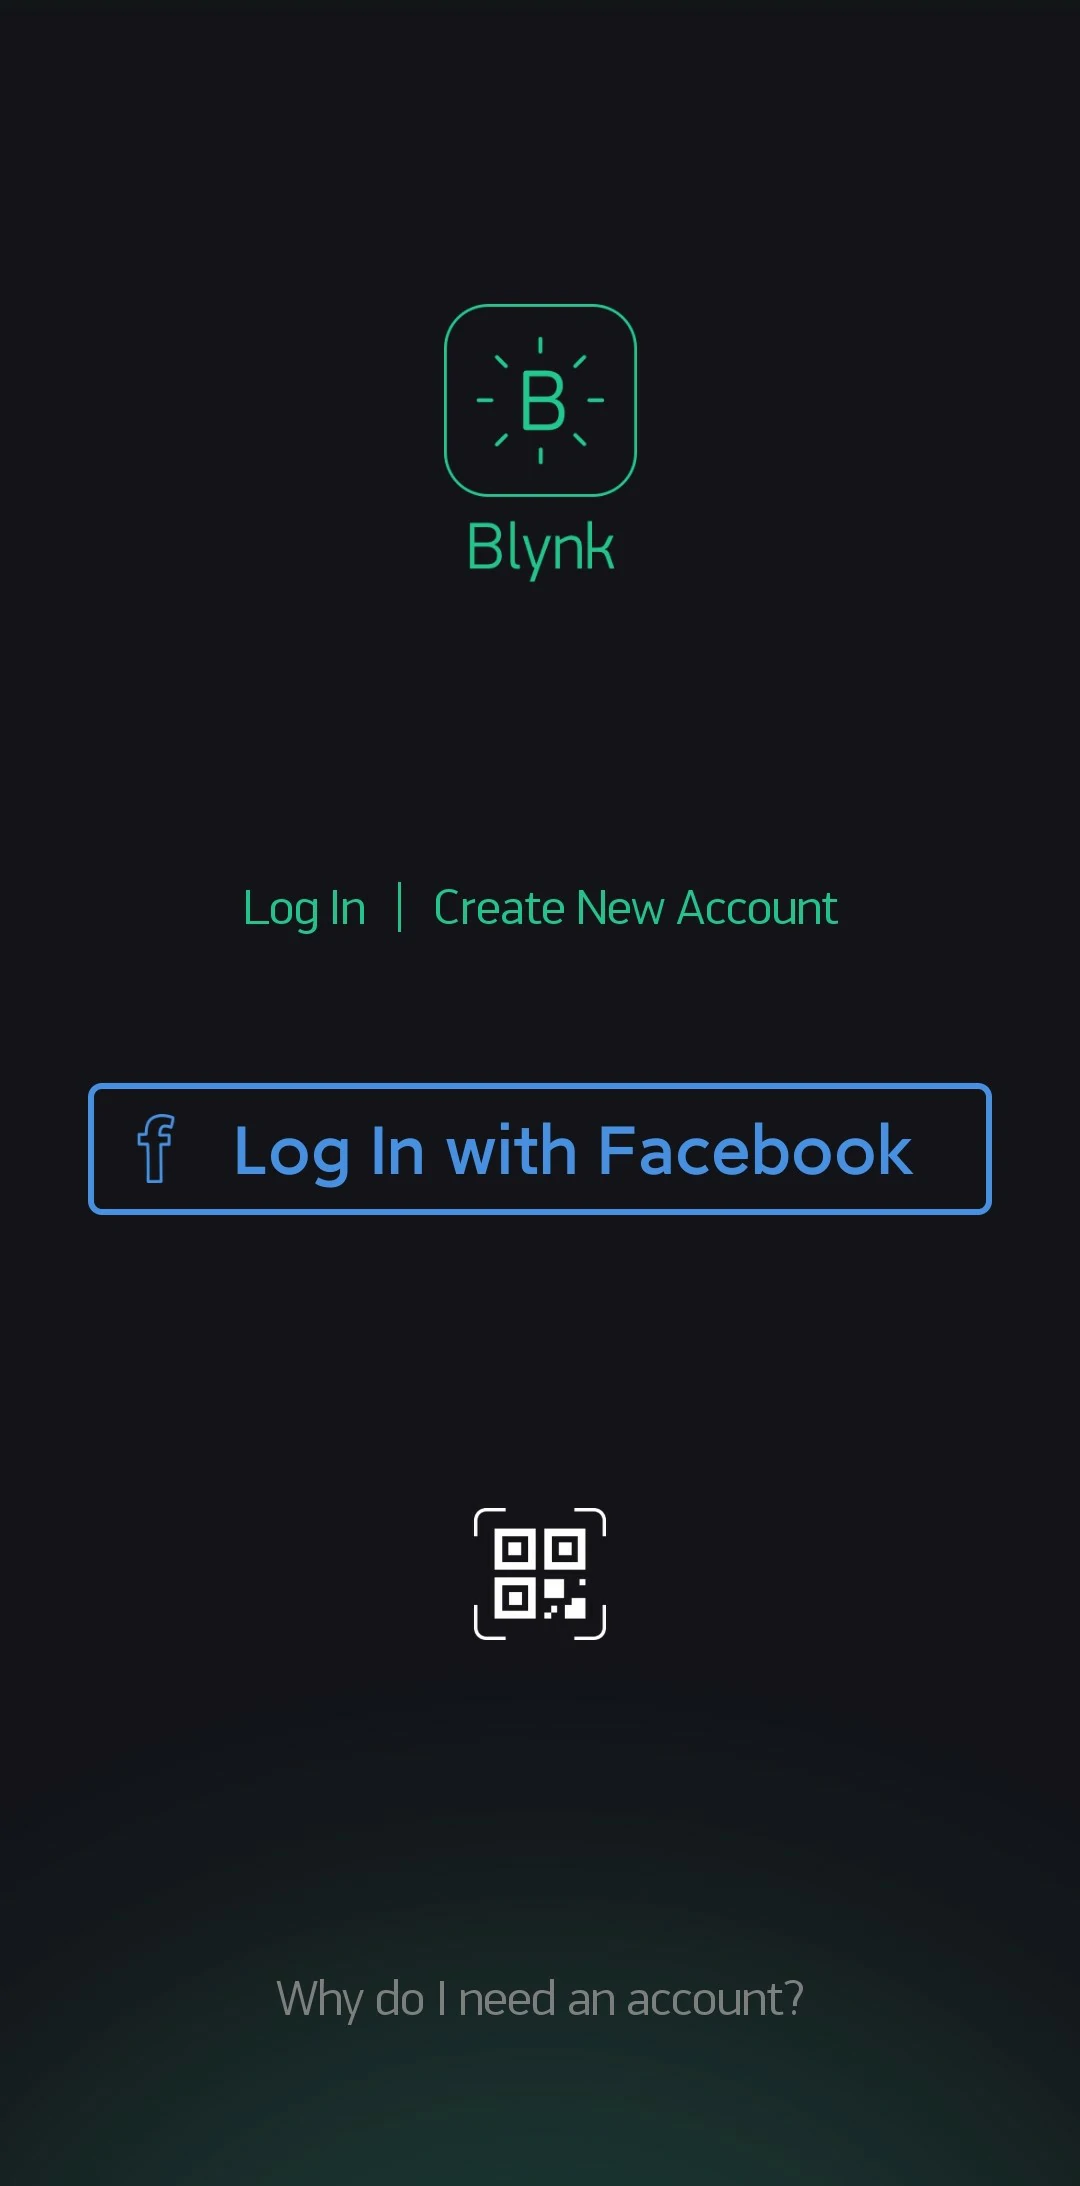 Create a project in the Blynk app, choosing ESP32 Dev Board as the device type and Wi-Fi as the connection mode.